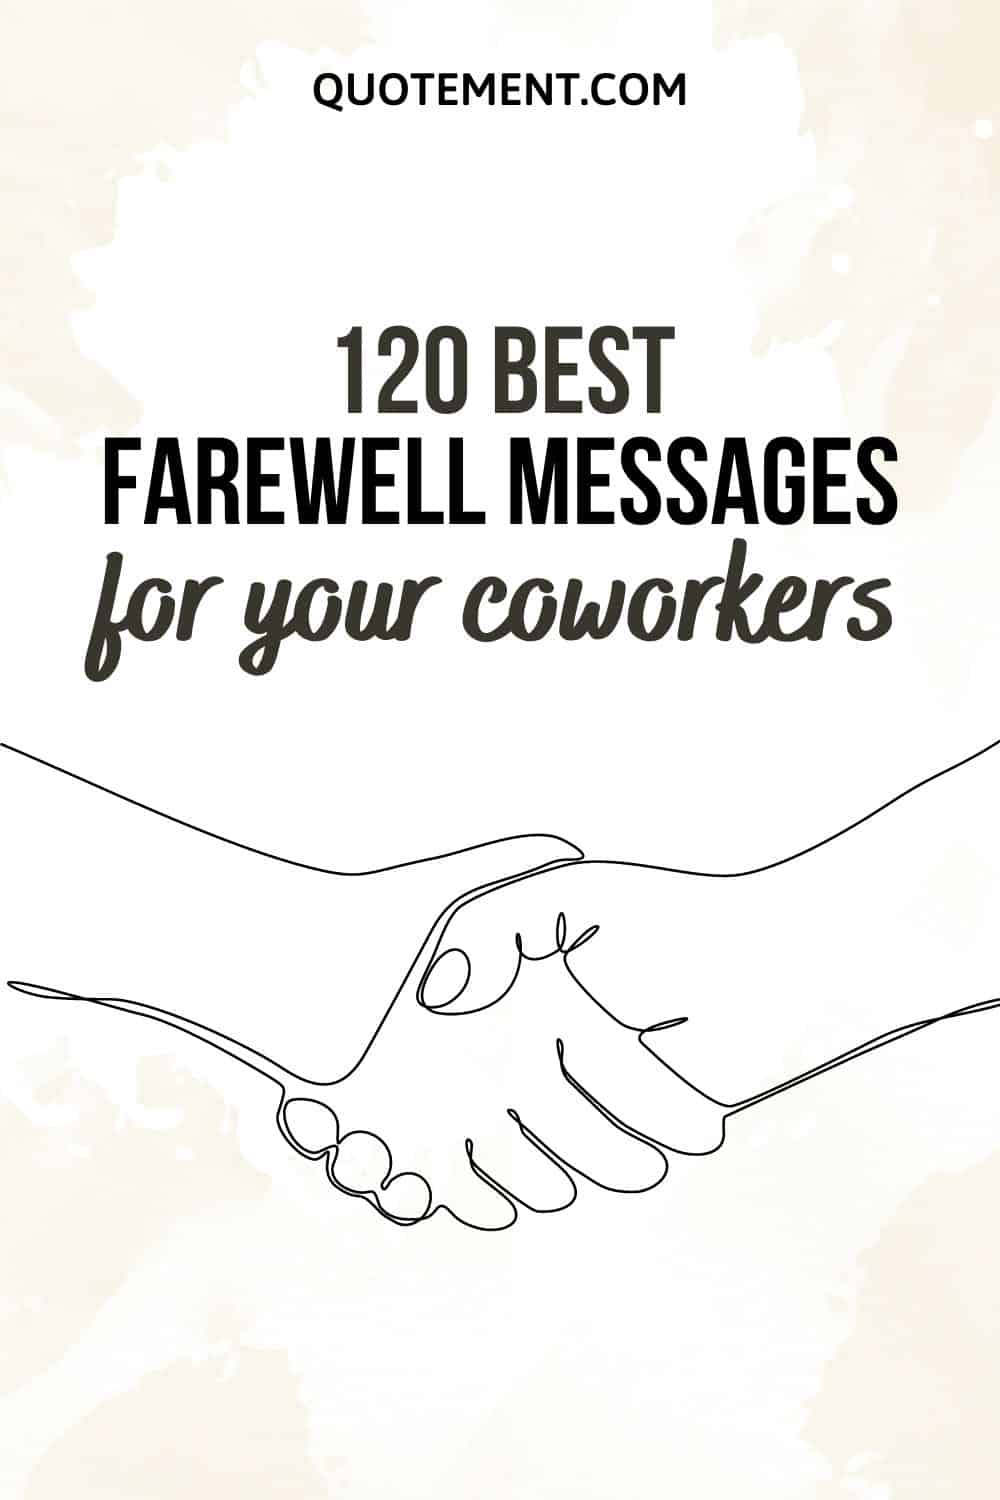 120 Farewell Messages To Say Goodbye To Your Coworker
